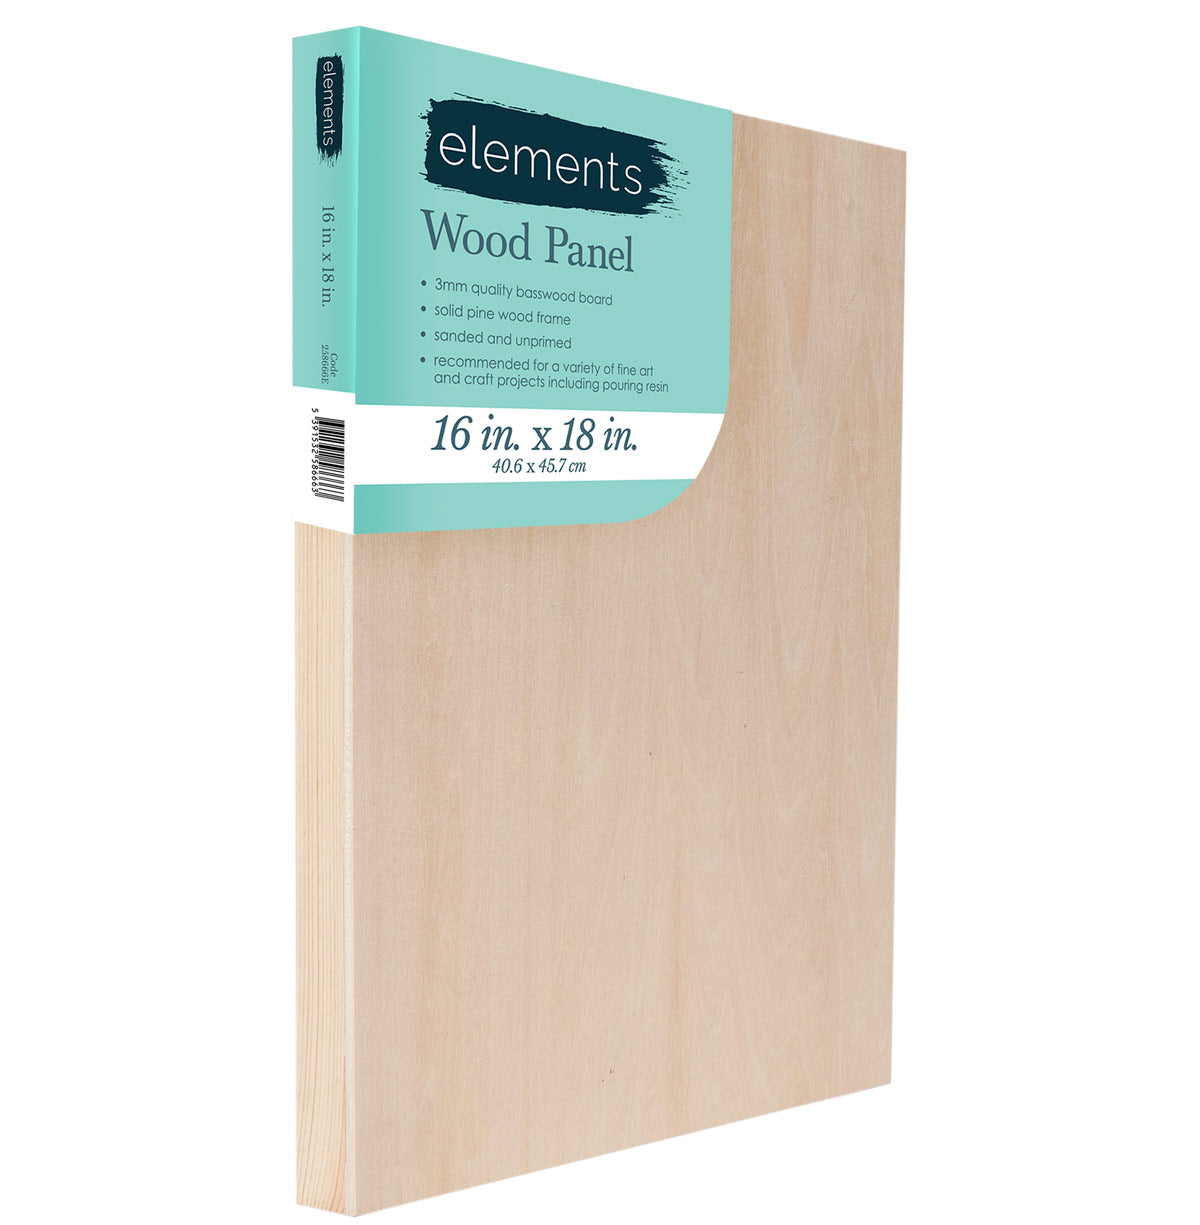 Elements Wooden Painting Panel Board - 16x18" - 40x45cm